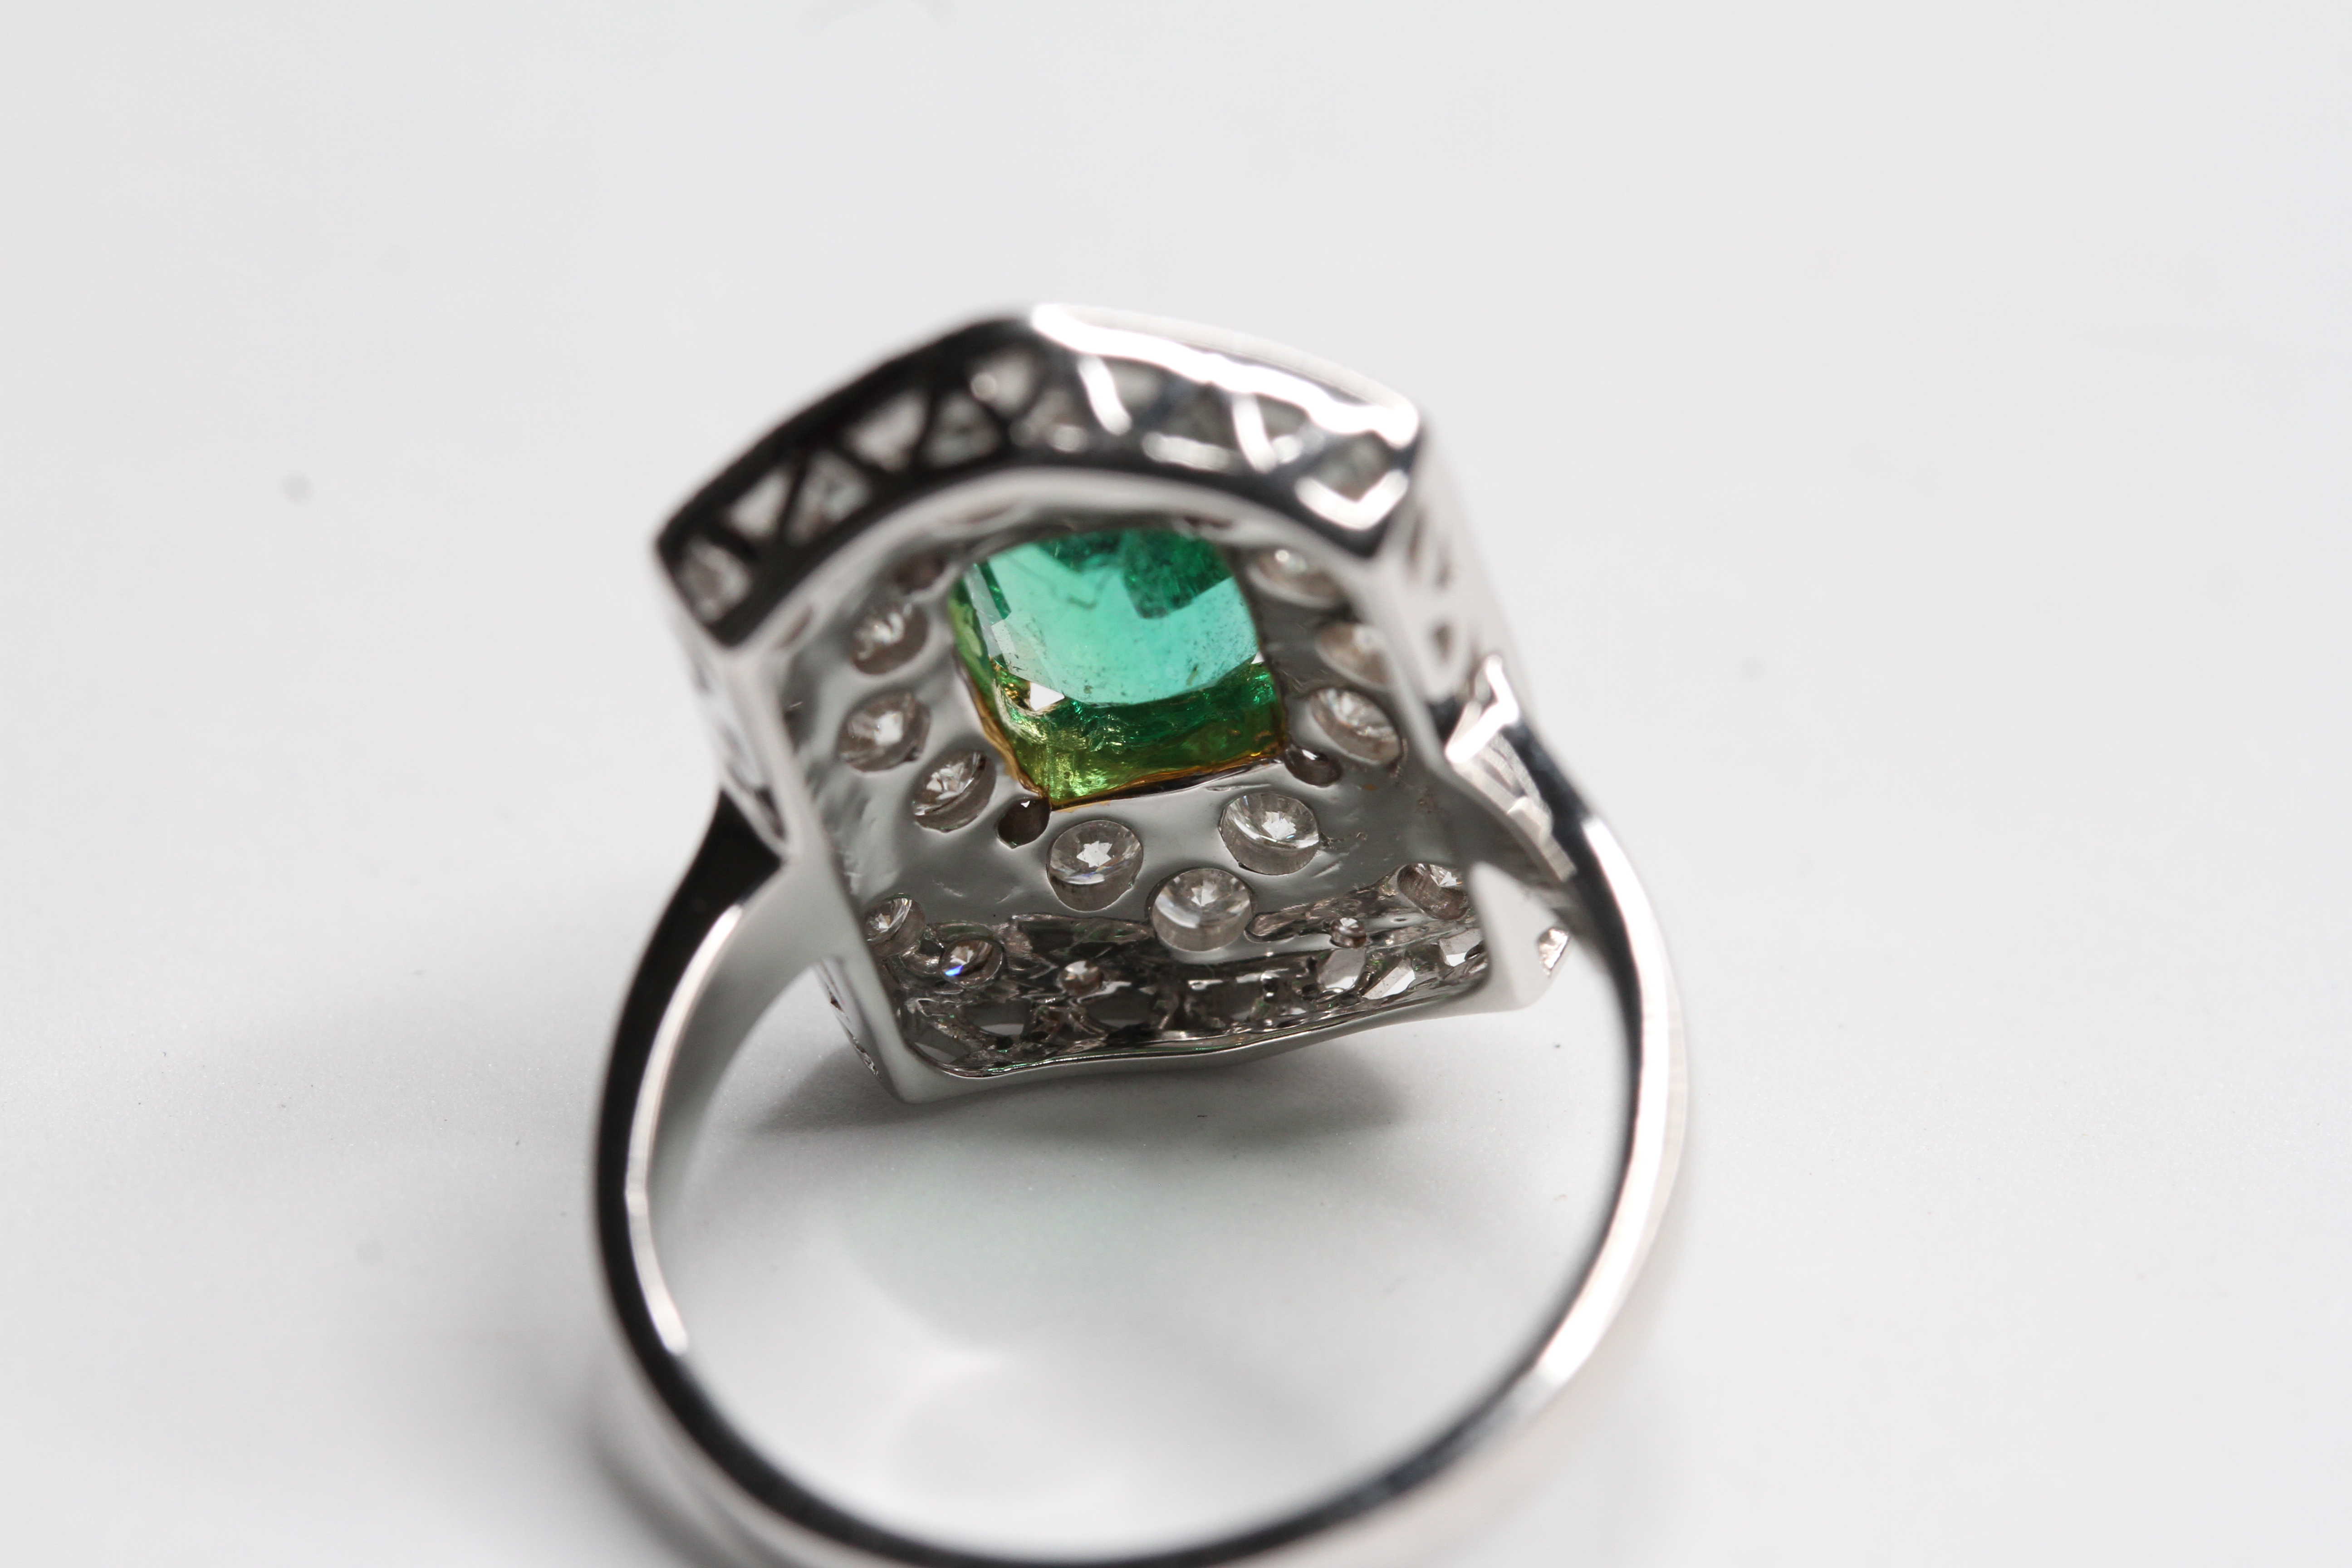 18WG Pave set diamond tablet ring with central claw set Emerald. EstE1.65 cts - Image 2 of 2